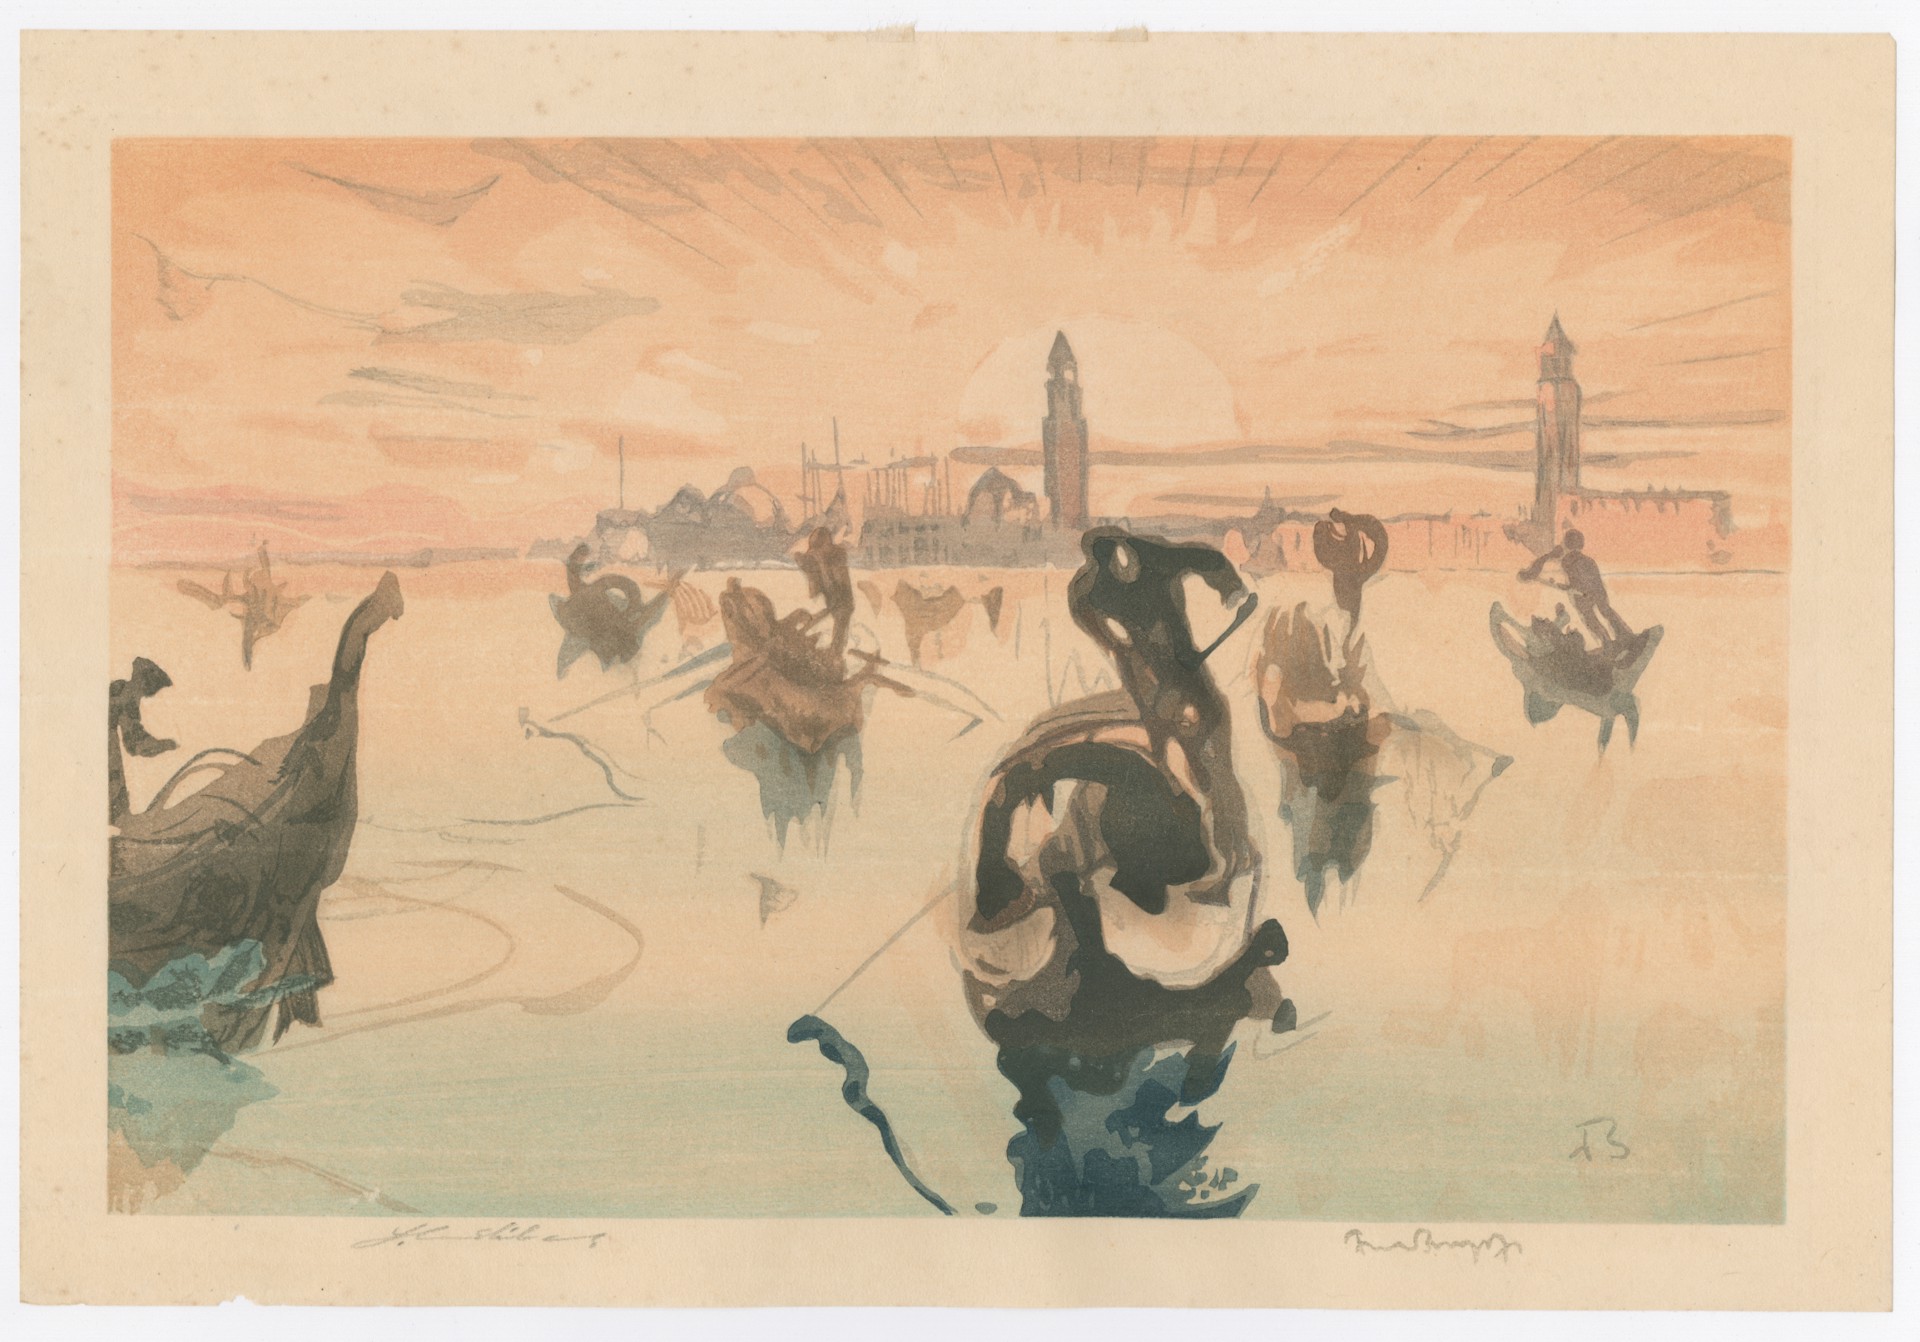 Drawings by Brangwyn, Carved and printed Urushibara Mokuchu by Brangwyn & Urushibara